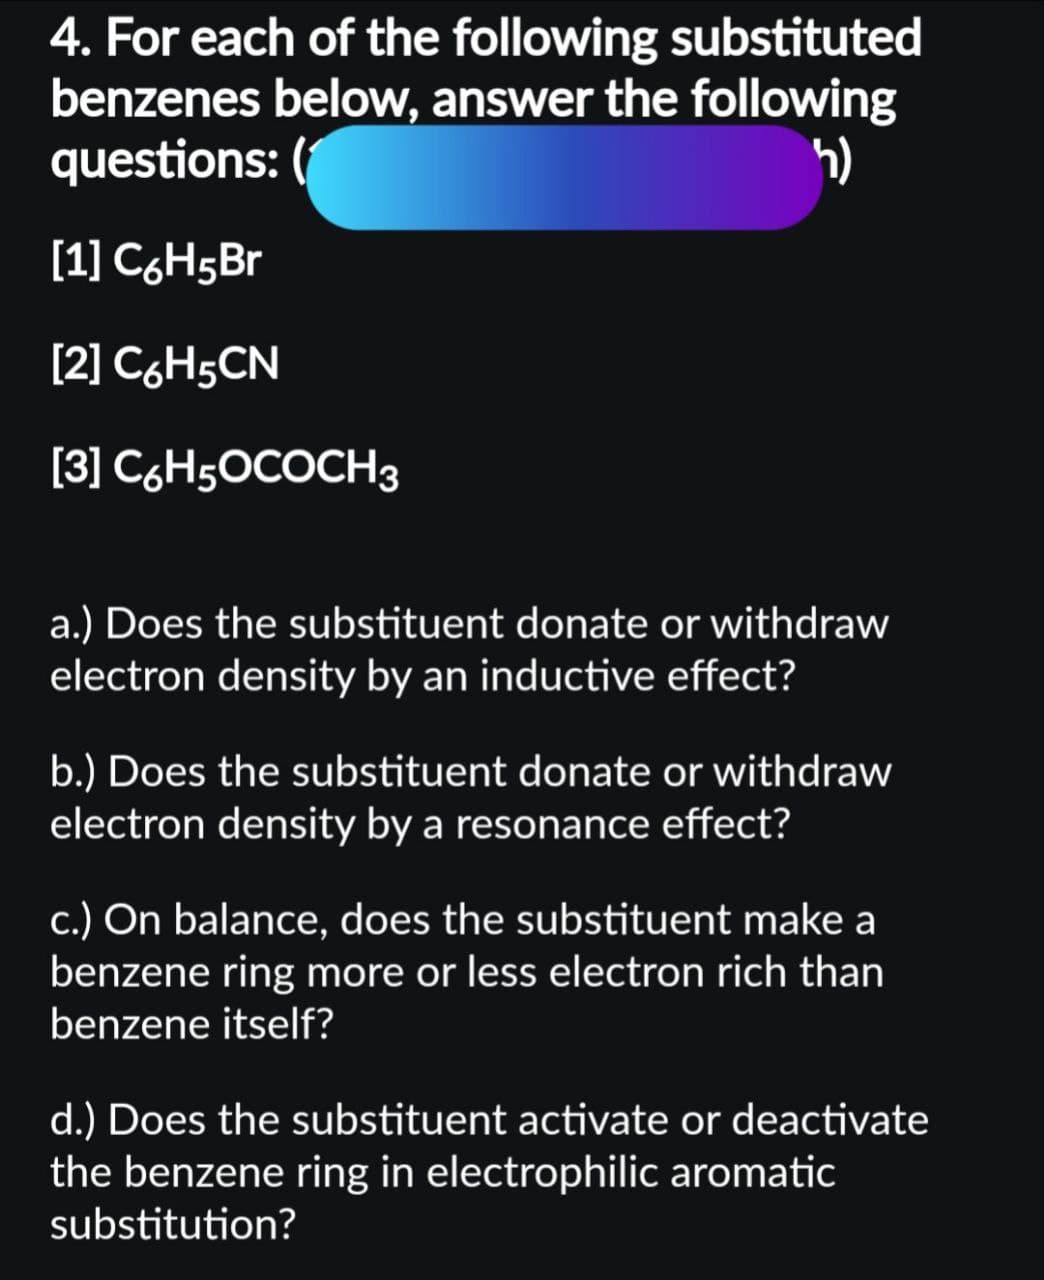 4. For each of the following substituted
benzenes below, answer the following
questions: (
h)
[1] C6H5Br
[2] C6H5CN
[3] C6H5OCOCH 3
a.) Does the substituent donate or withdraw
electron density by an inductive effect?
b.) Does the substituent donate or withdraw
electron density by a resonance effect?
c.) On balance, does the substituent make a
benzene ring more or less electron rich than
benzene itself?
d.) Does the substituent activate or deactivate
the benzene ring in electrophilic aromatic
substitution?